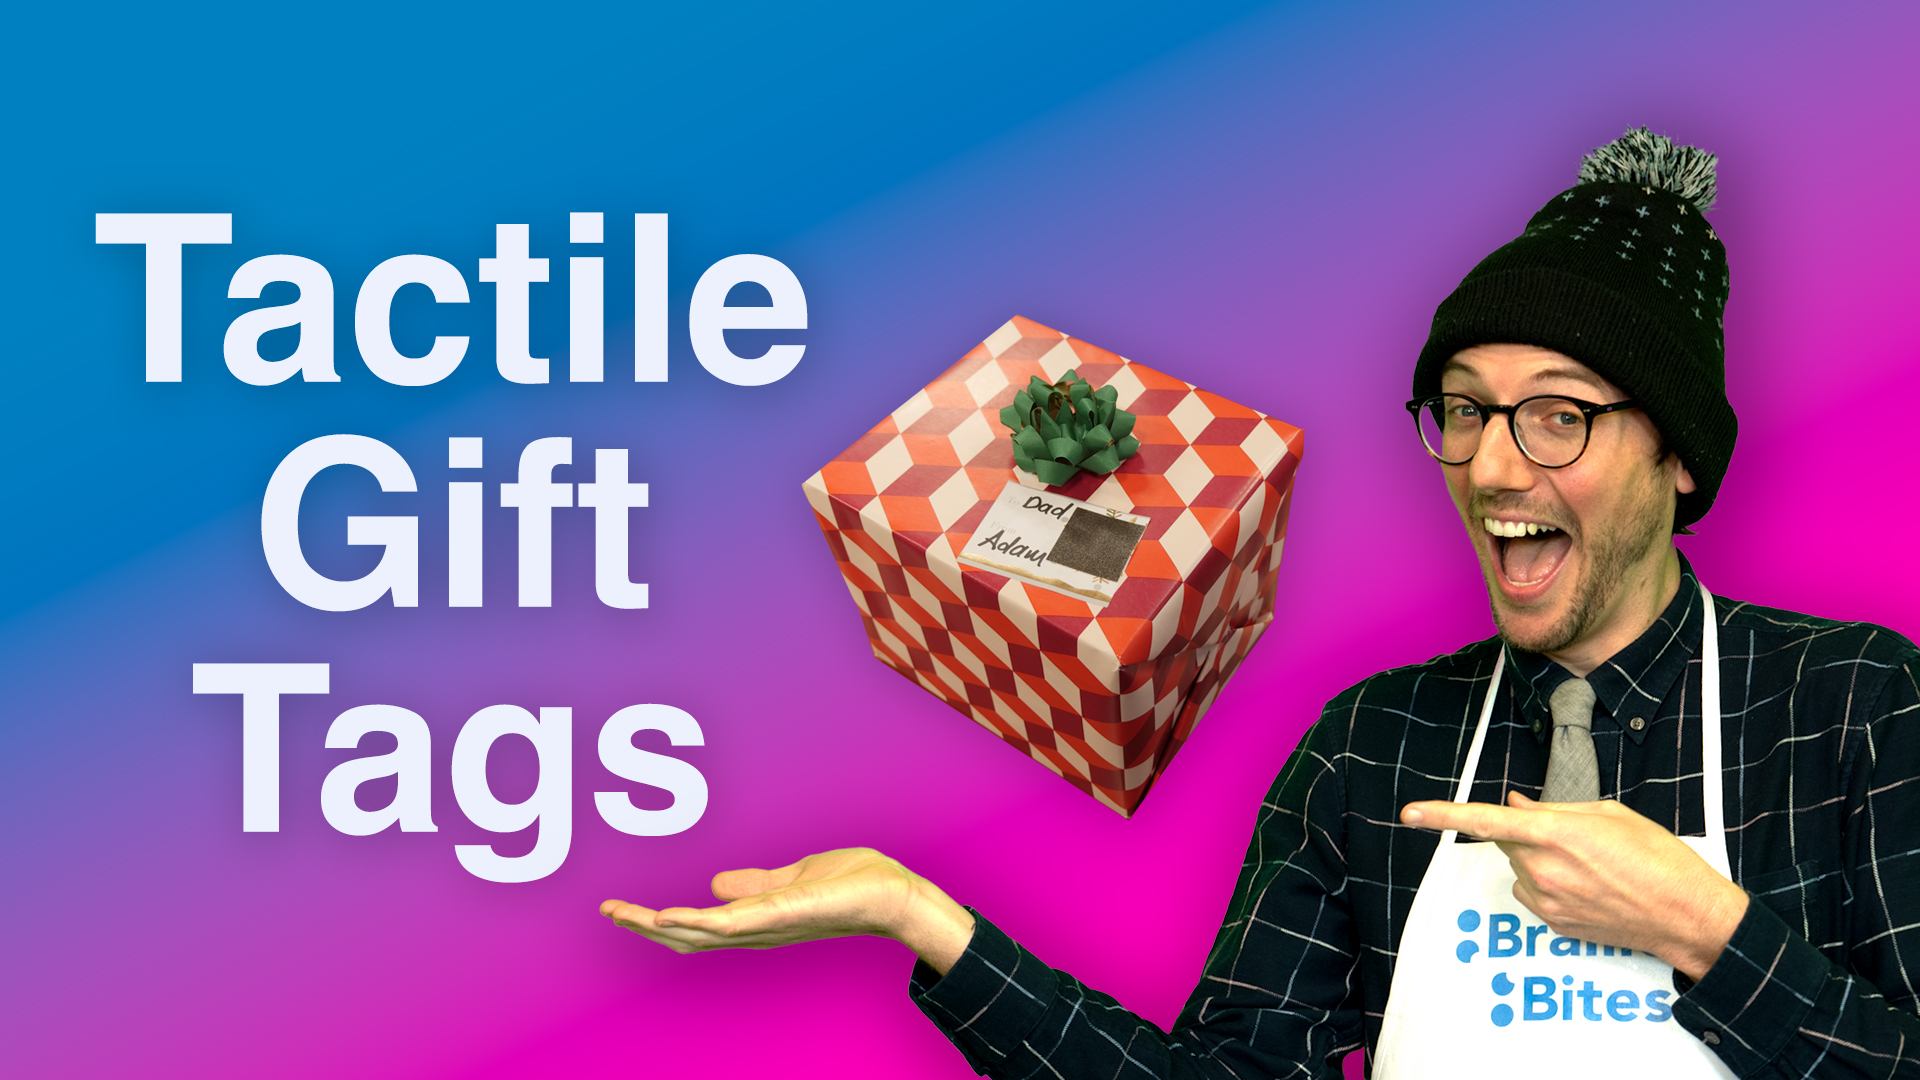 Video thumbnail shows Adam smiling and pointing at text that read 'Tactile Gift Tags'. A gift wrapped in colourful paper with a bow and a gift tag is also shown.